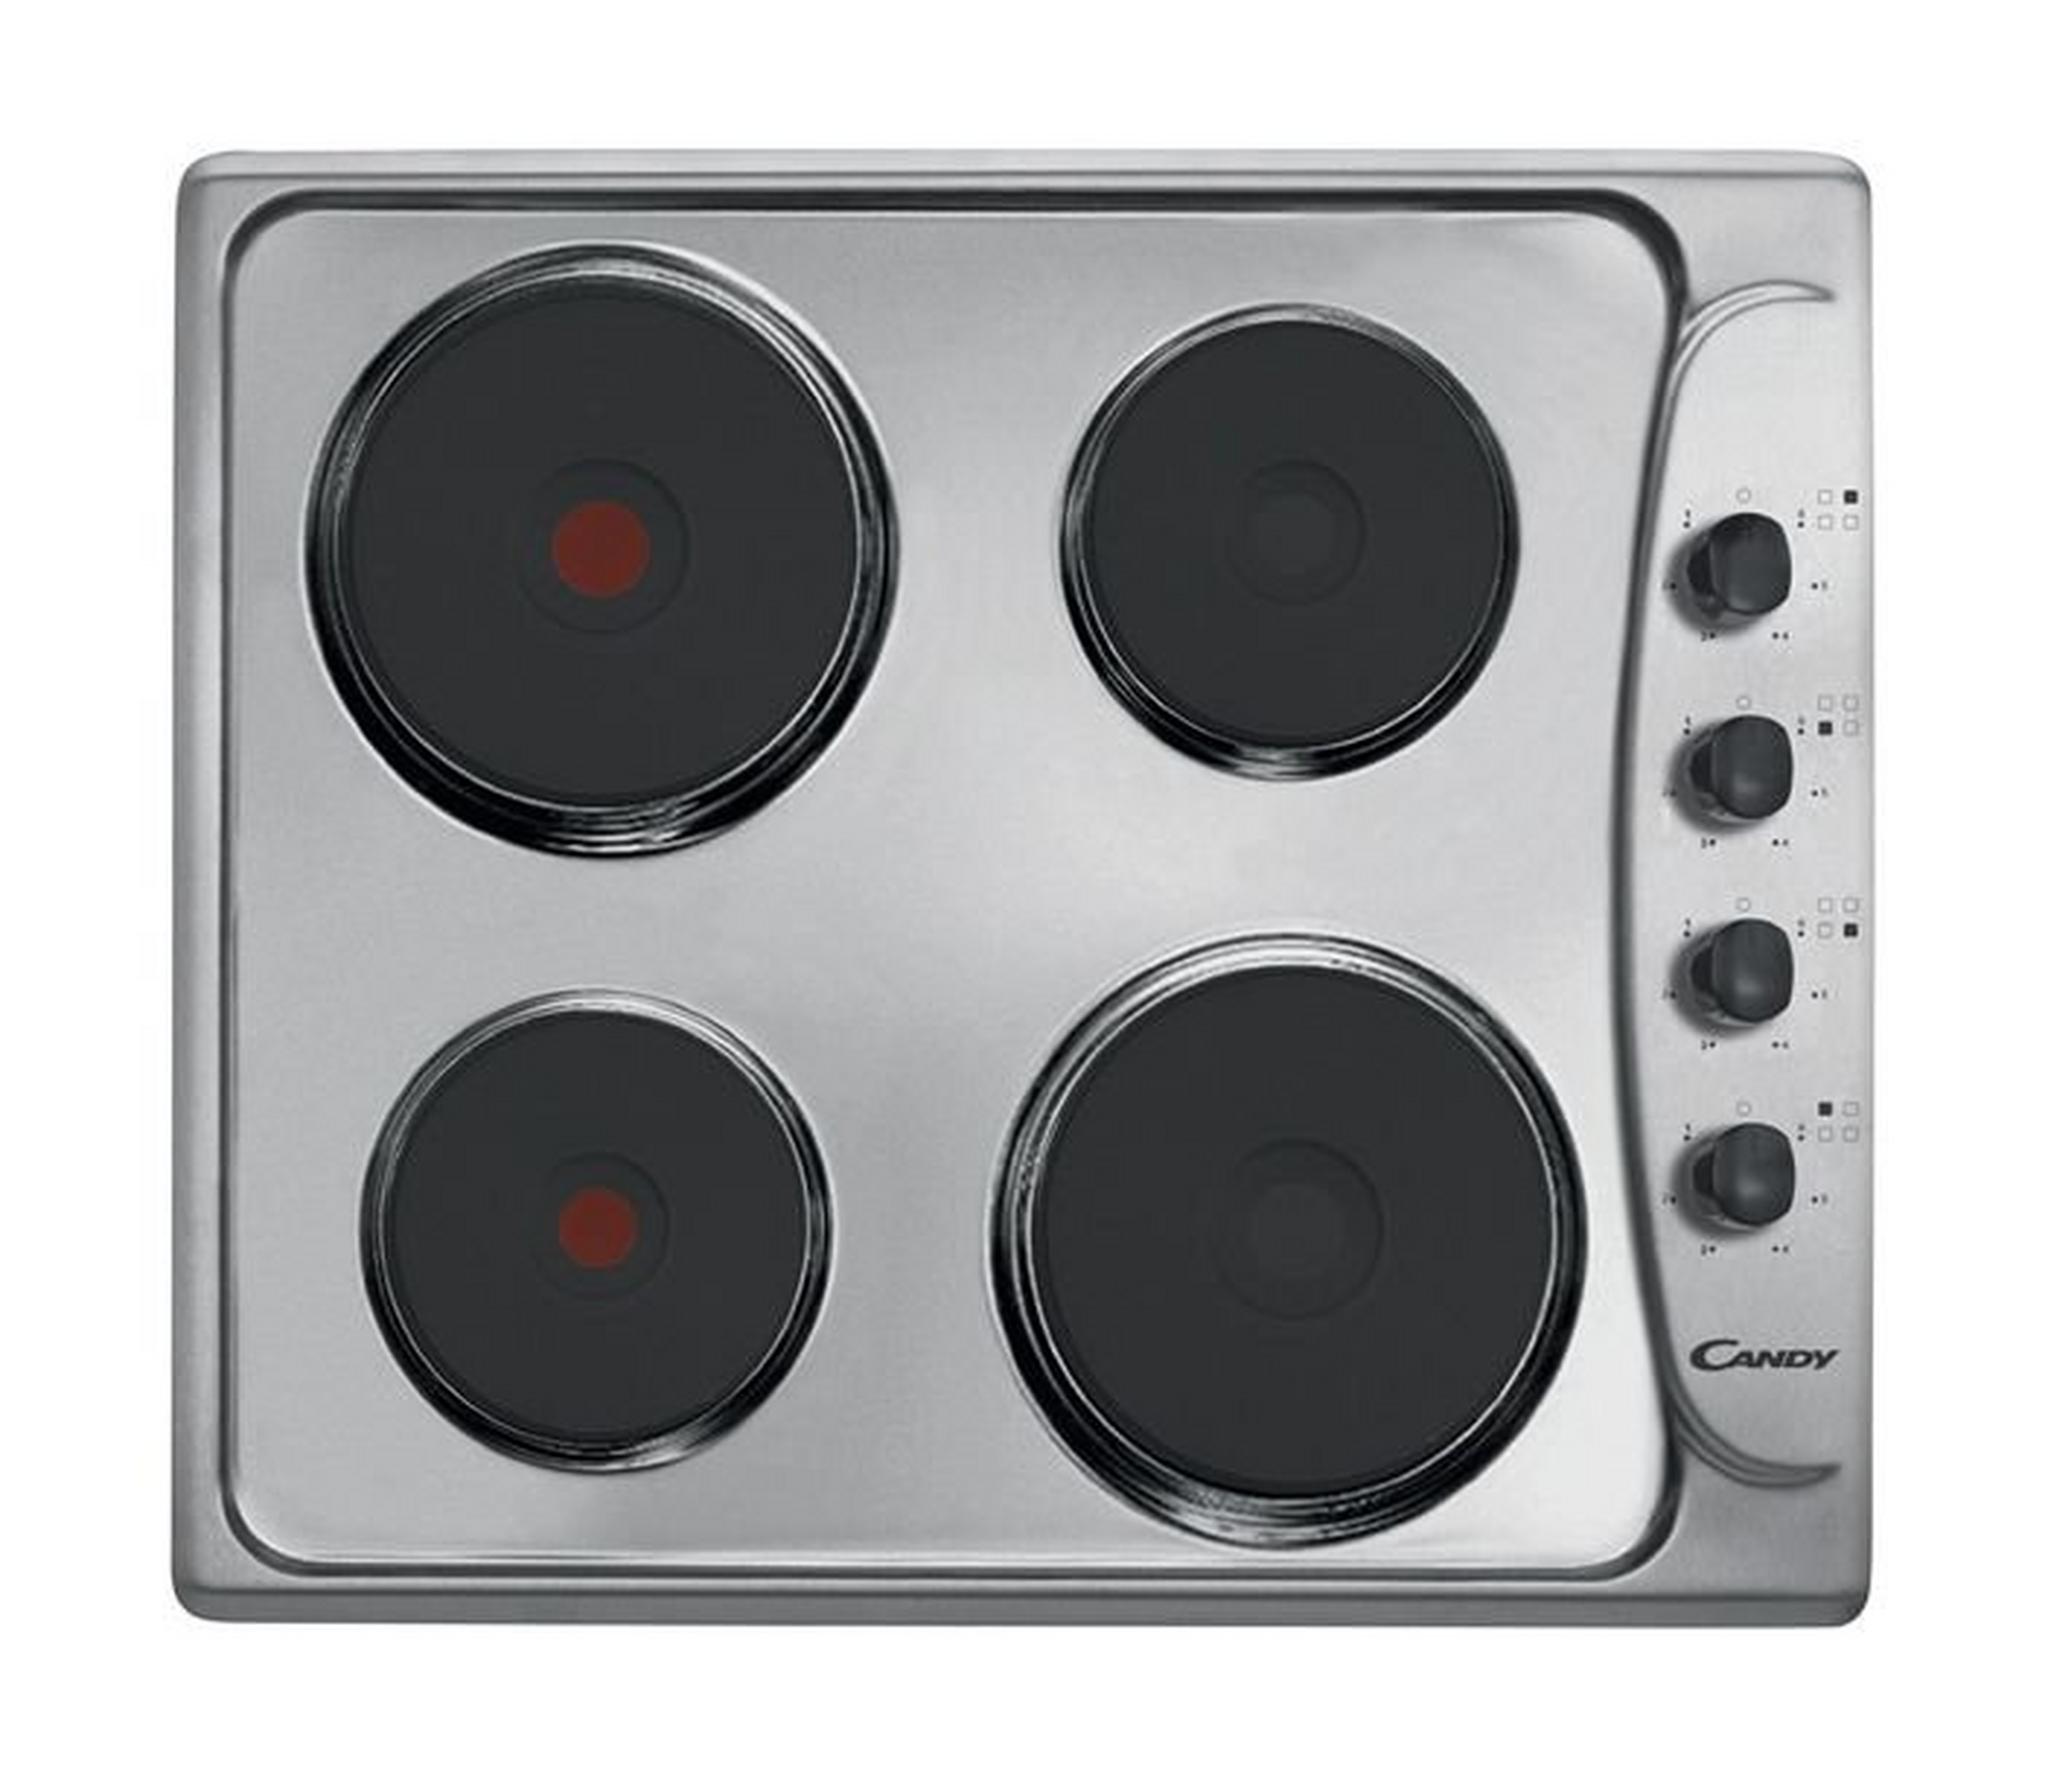 Candy 60CM 4-Burners Electric Hob (PLE64X) - Stainless Steel